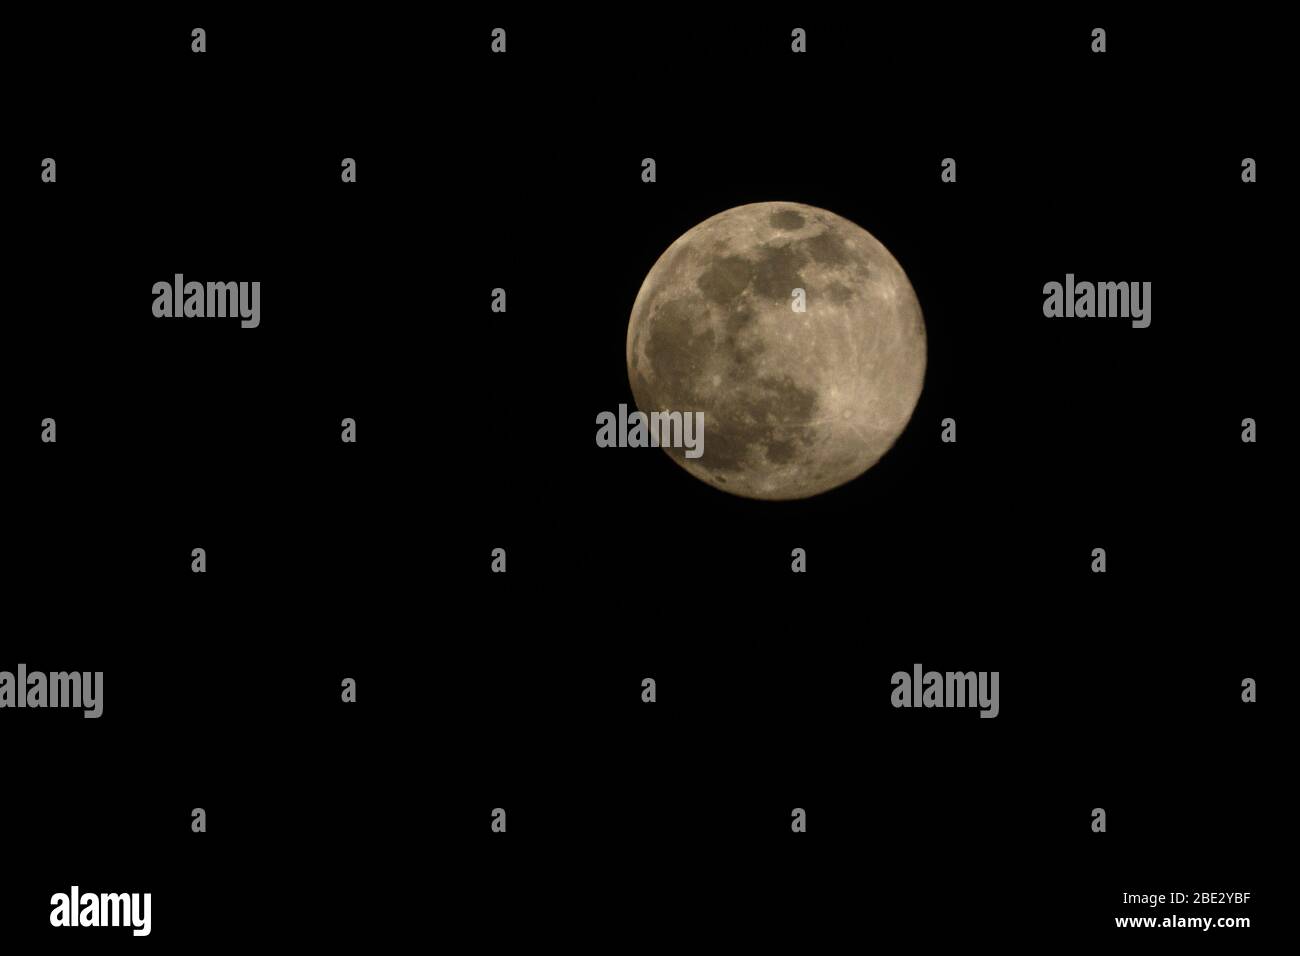 Close-up of a full moon to the right side of the image (landscape orientation) Stock Photo